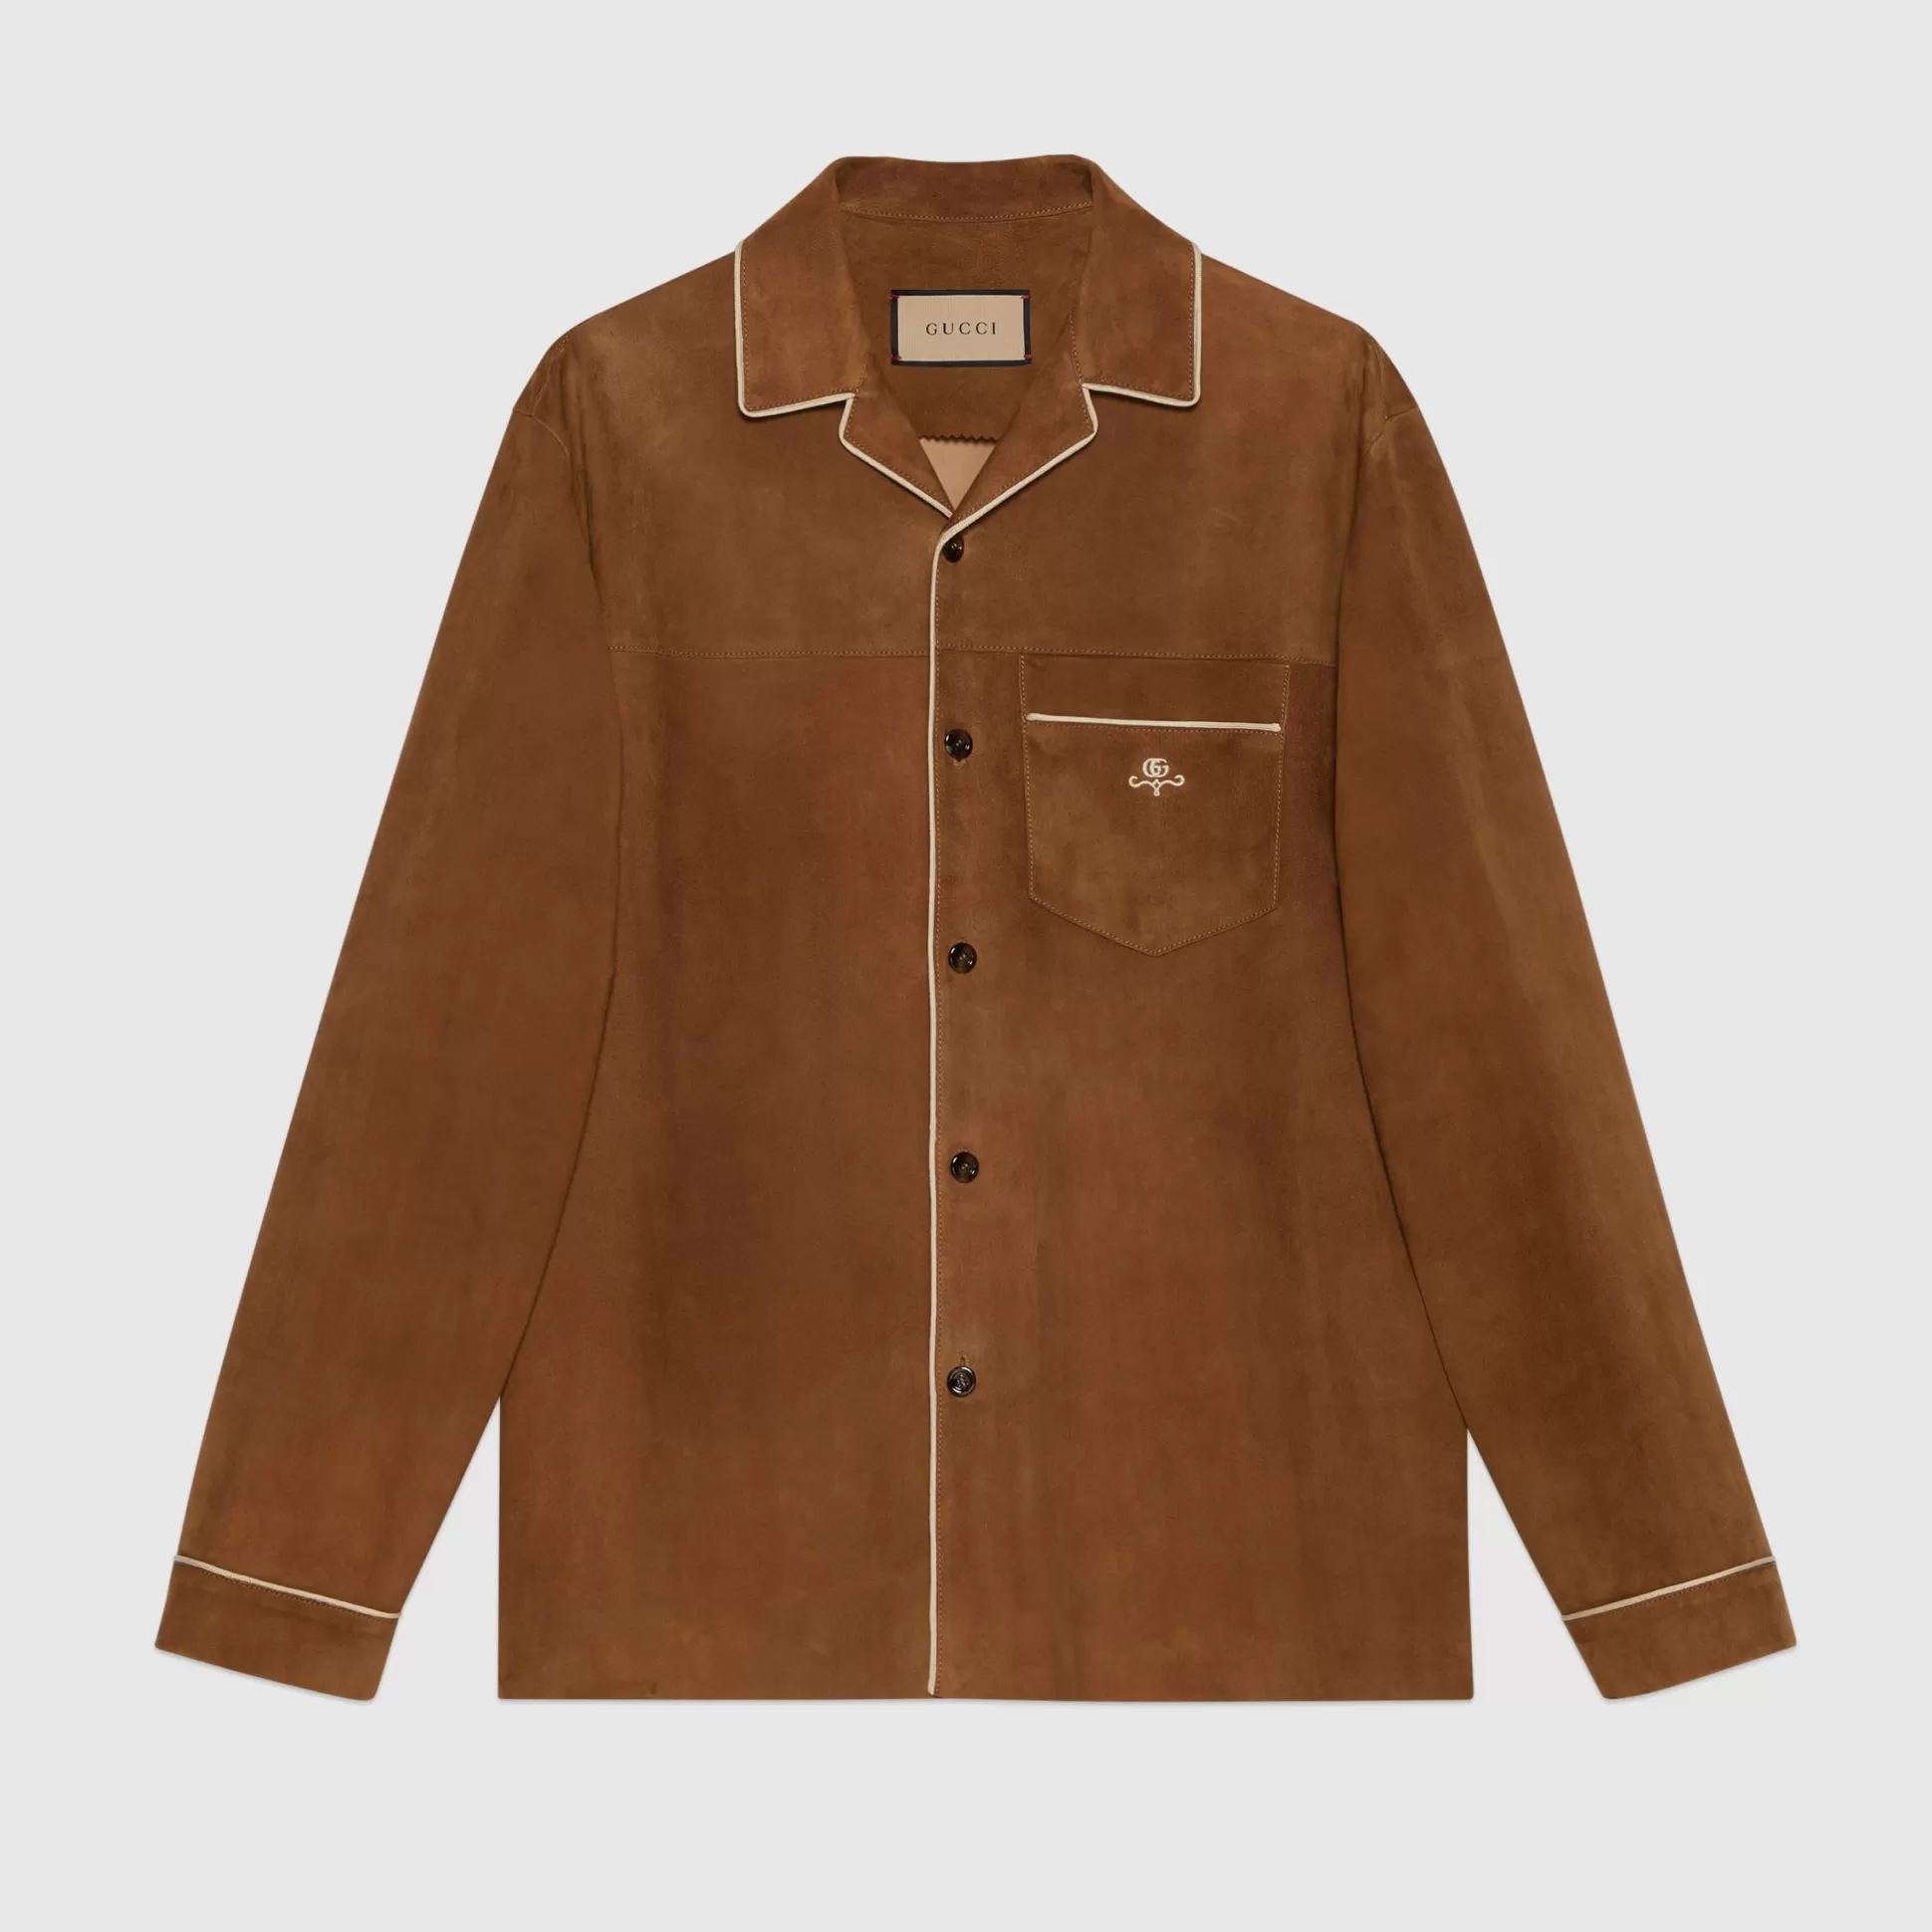 GUCCI Suede Shirt With Embroidery-Men Leather